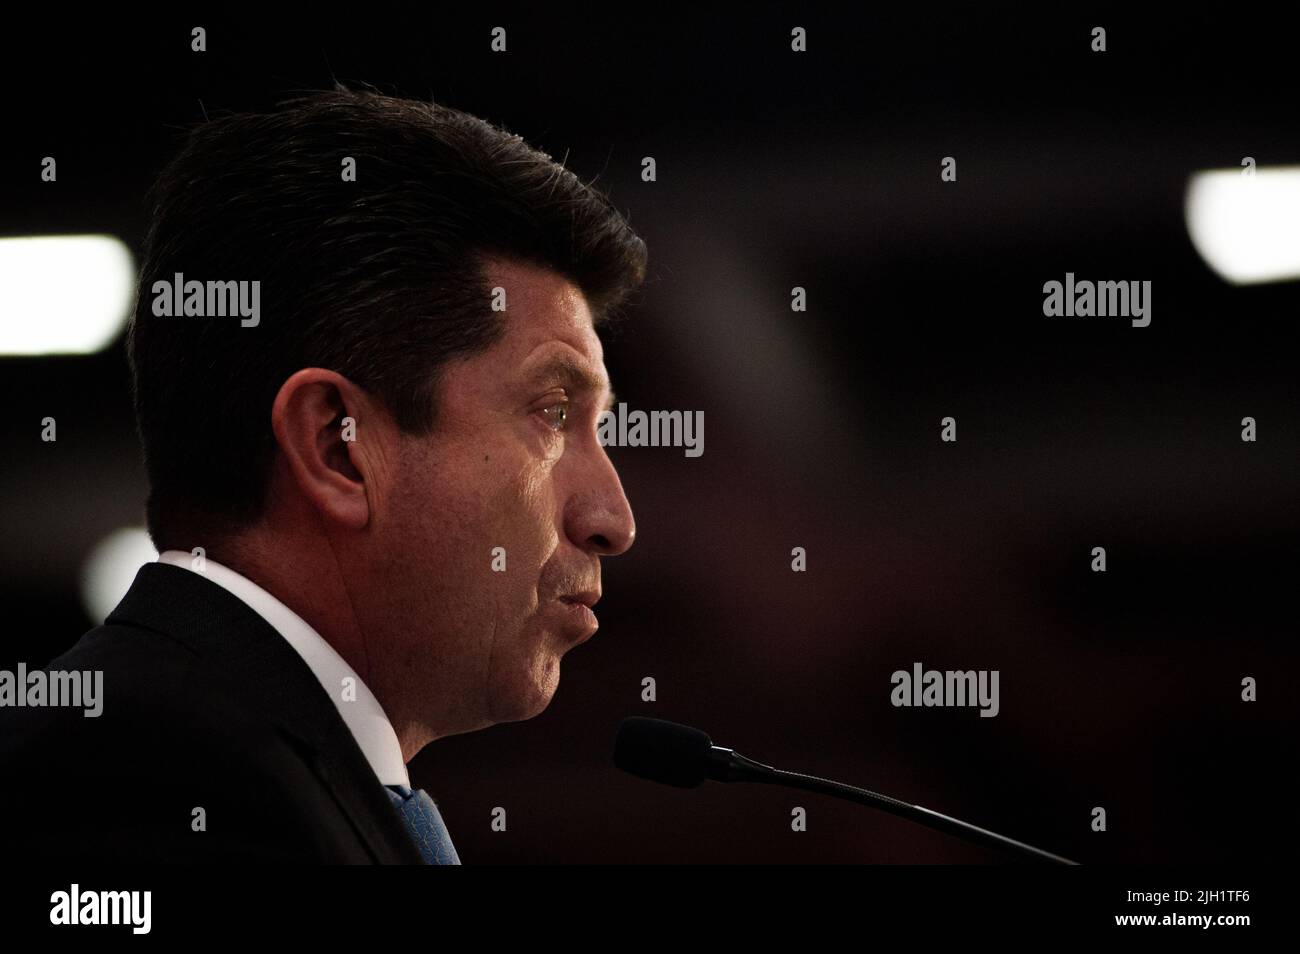 Colombia's minister of Defense Diego Molano speaks during Colombia's defense ministry final report of accountabilities before government transition to Stock Photo